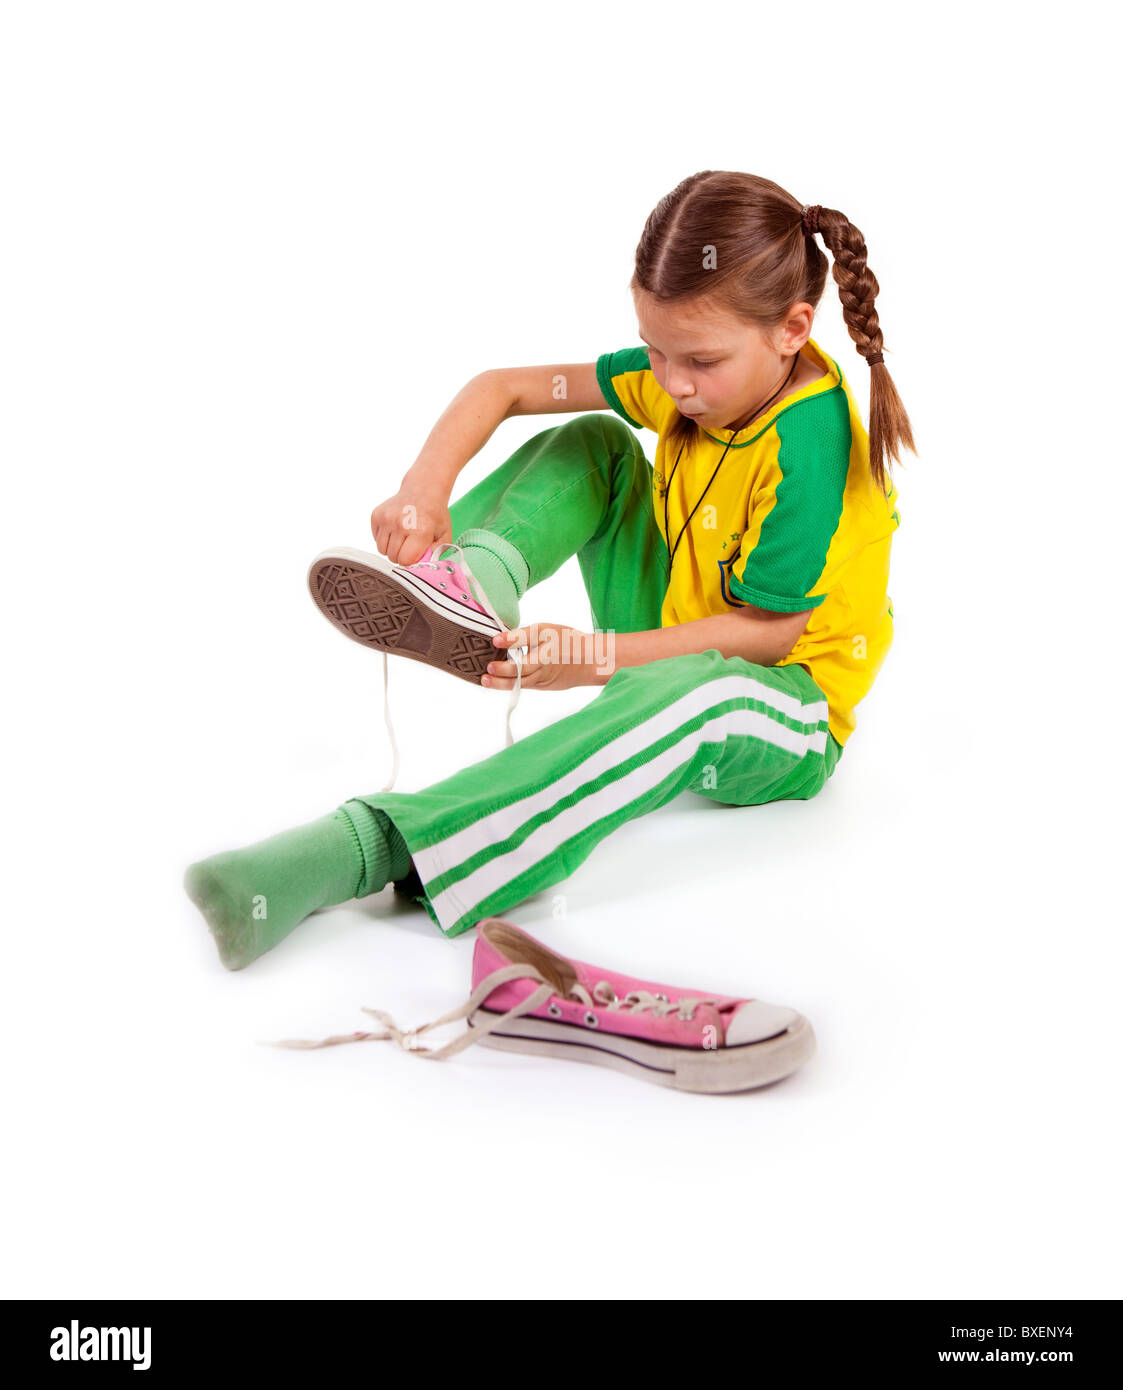 girl puts sport shoes on Stock Photo